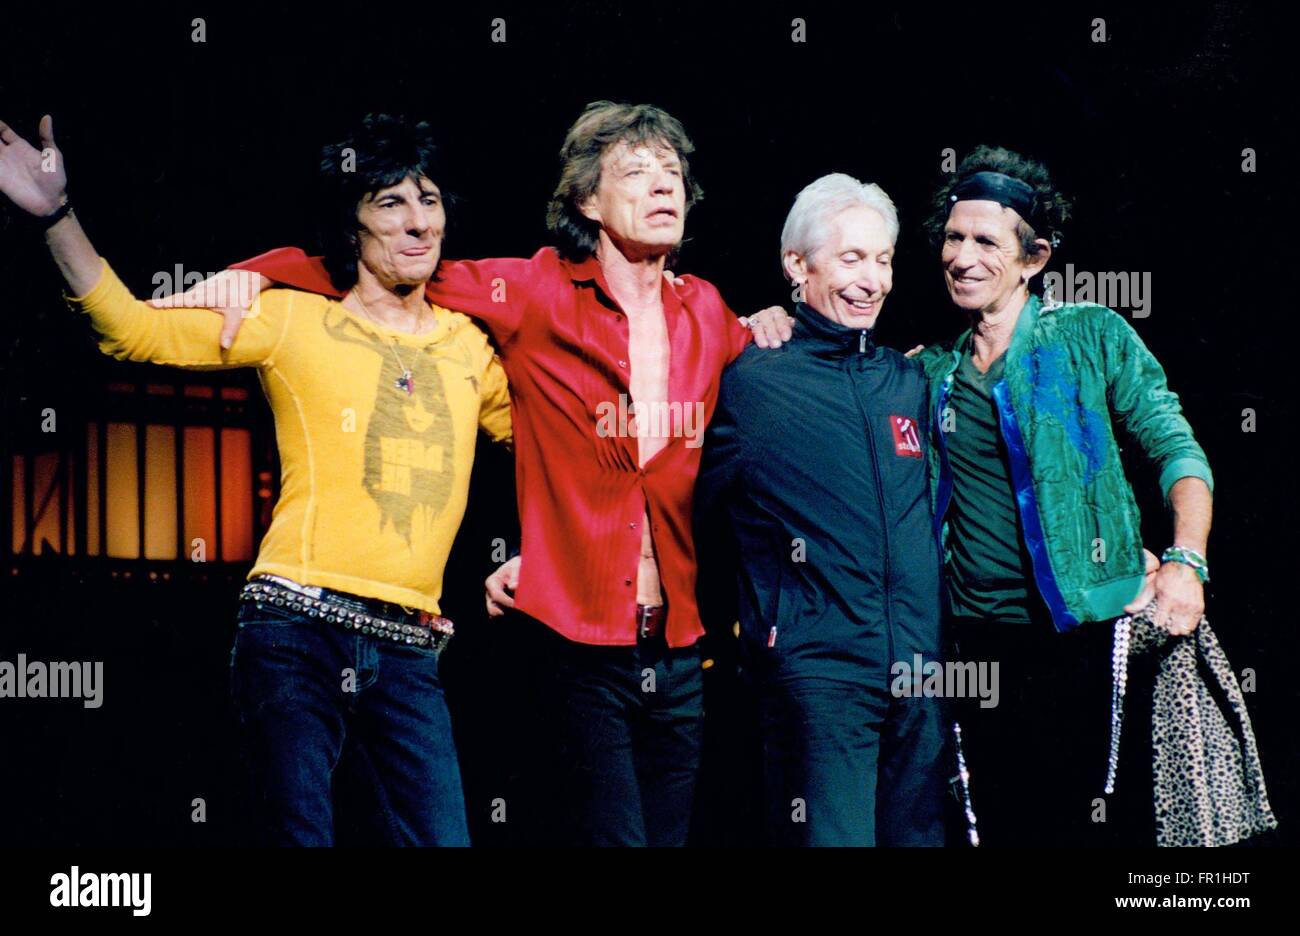 Mick Jagger, Keith Richards, Charlie Watts, Ron Wood THE ROLLING STONES  MADISON SQUARE GARDEN 01-20-2006  photo Michael Brito Stock Photo